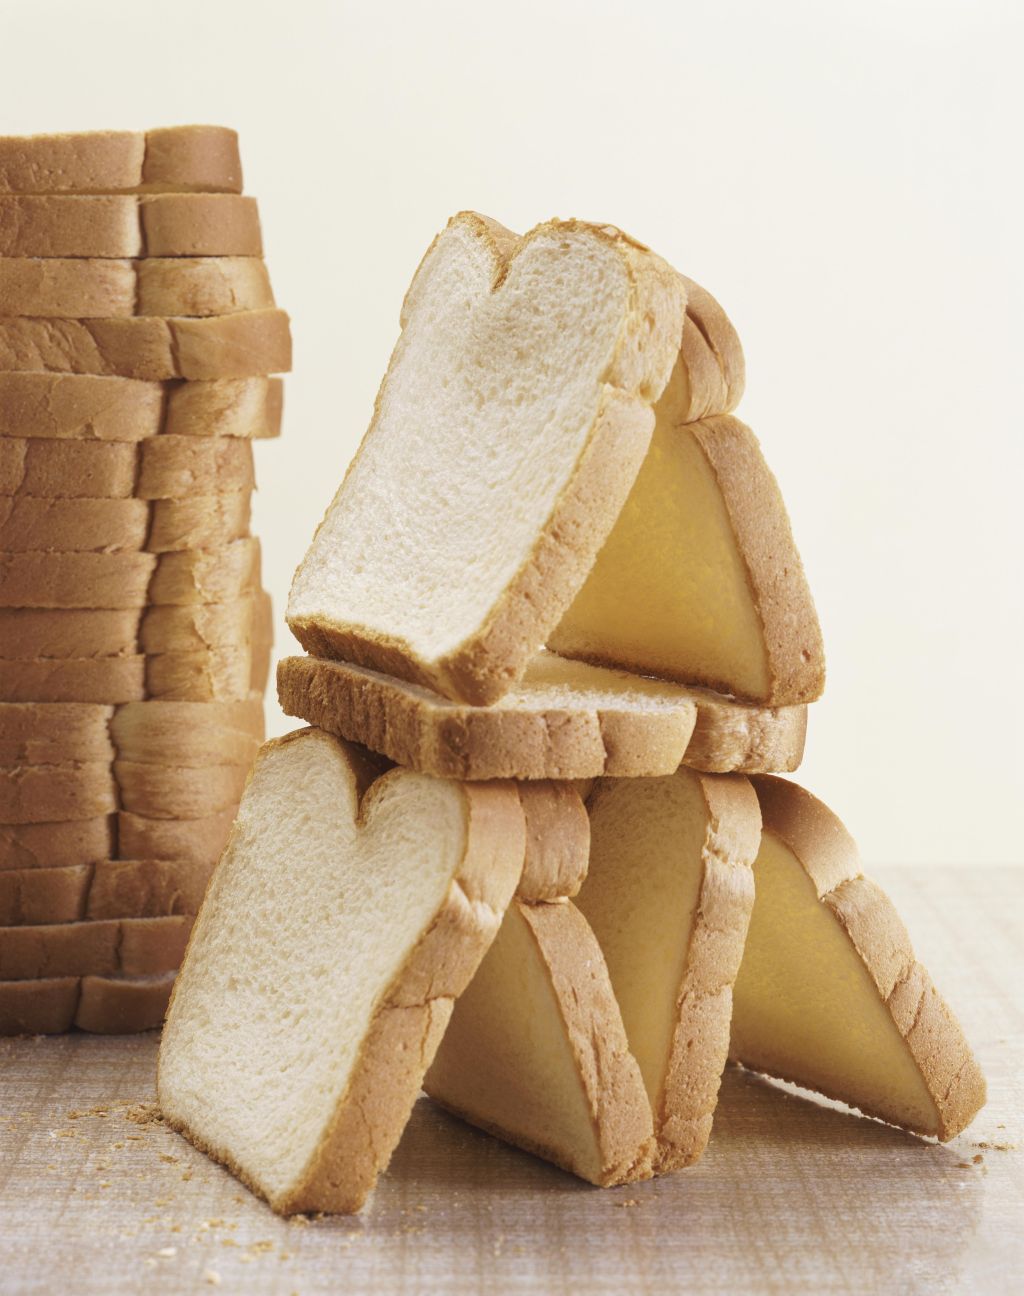 Still Life With Slices of White Bread